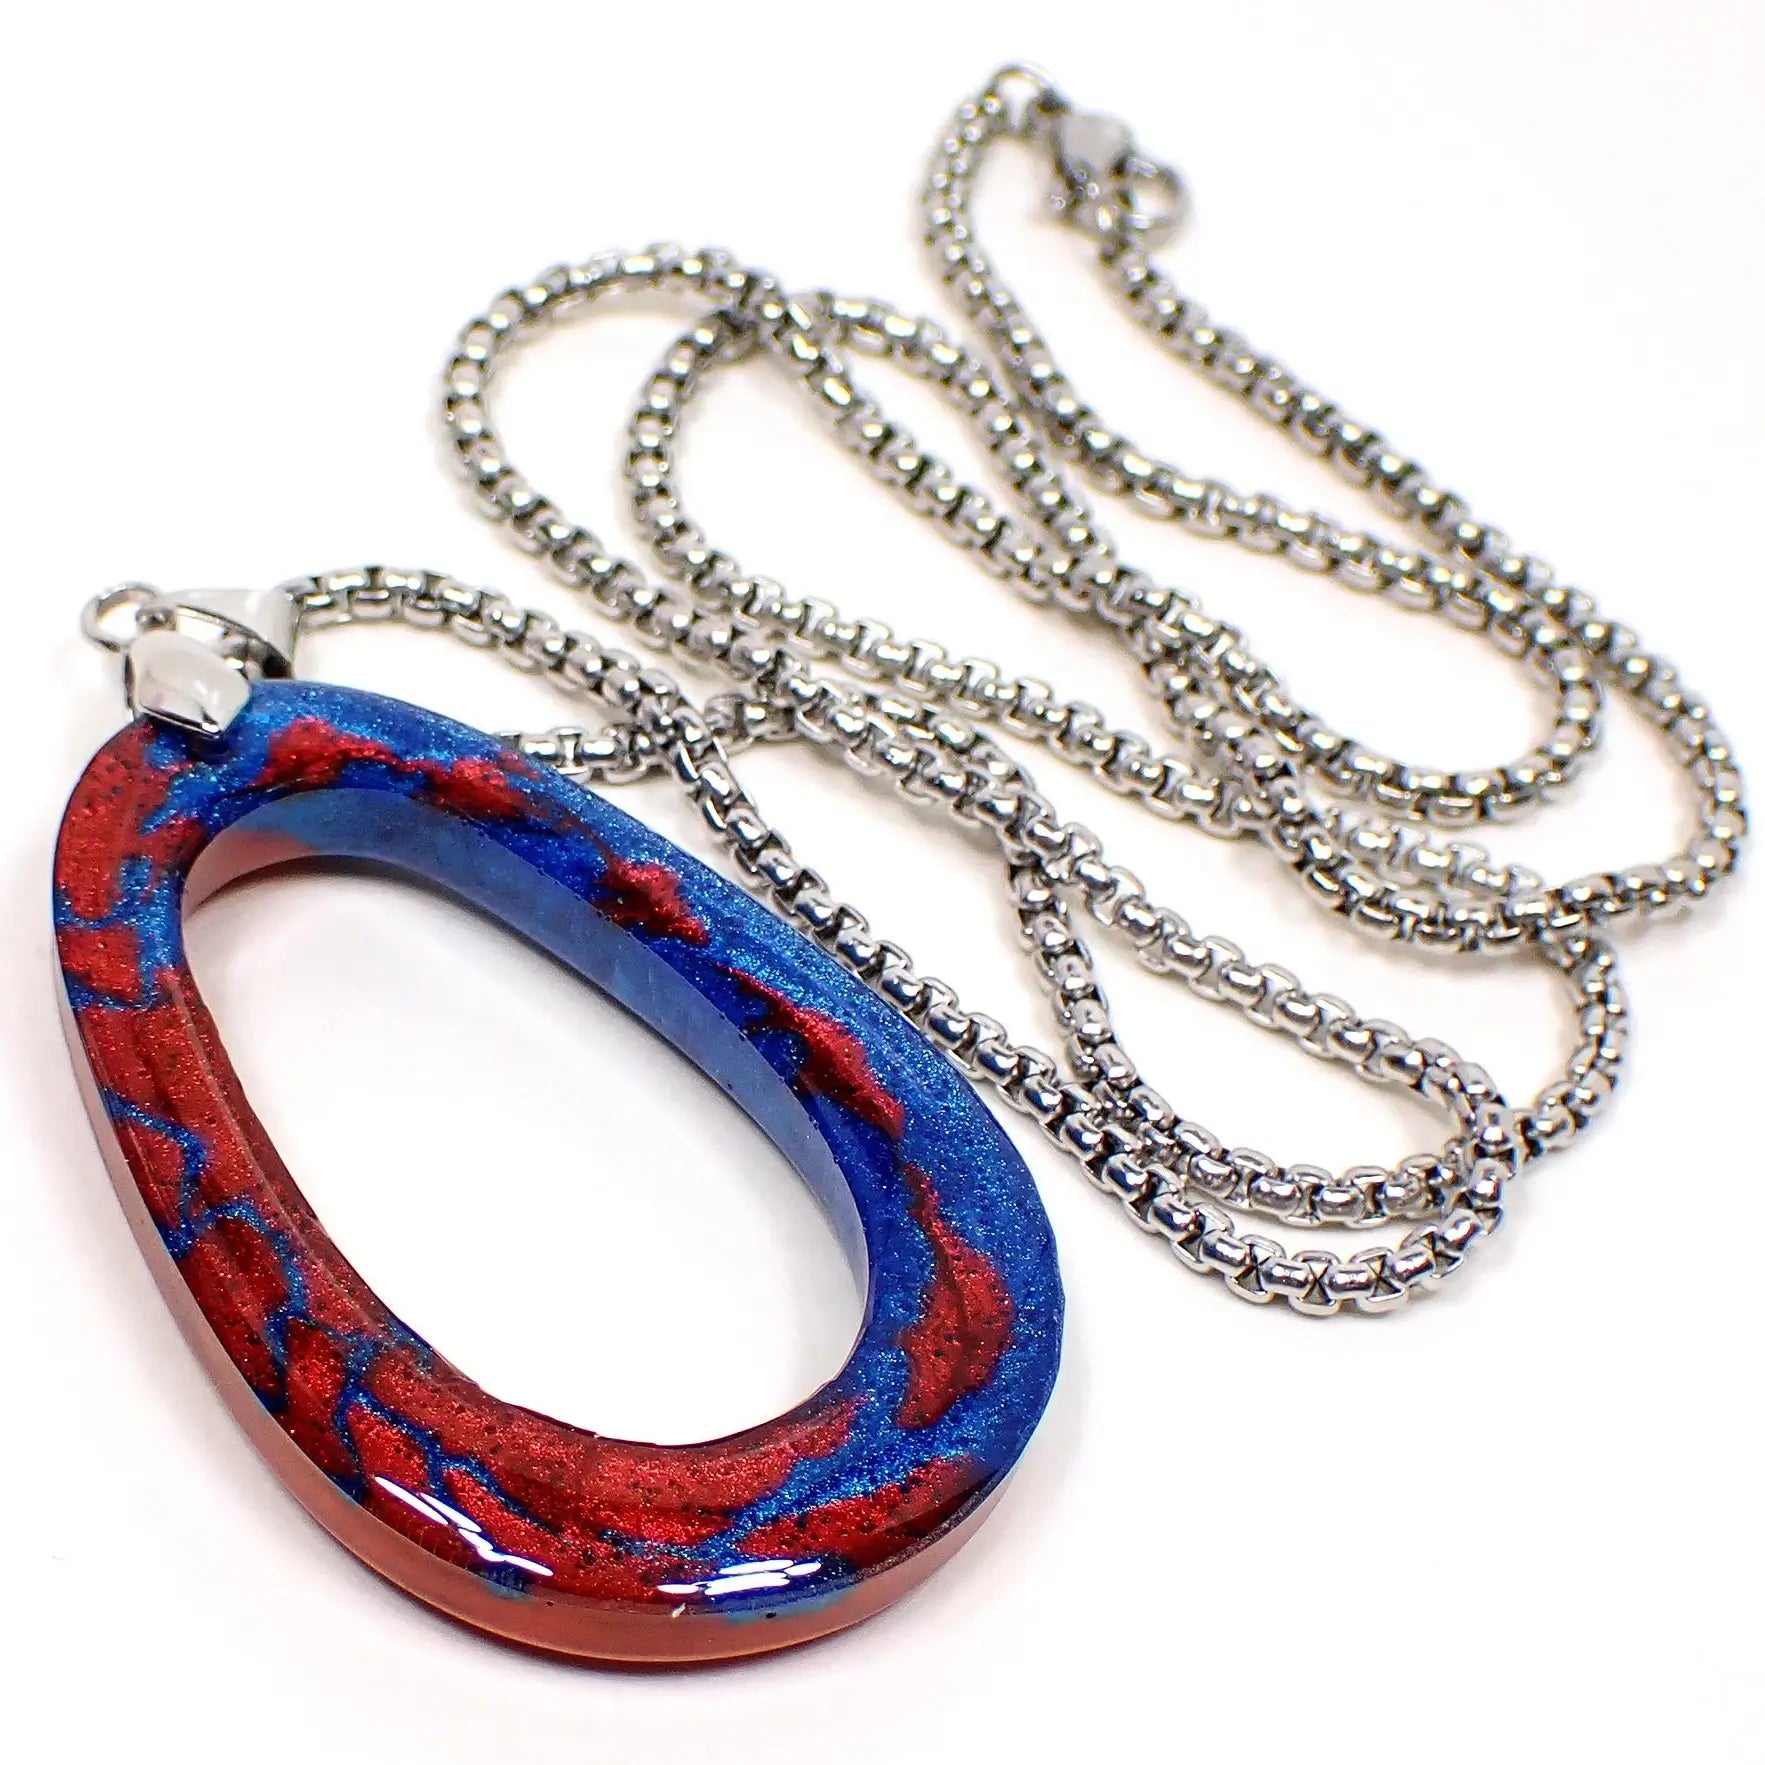 Angled enlarged view of the handmade resin pendant necklace. The metal is antiqued silver tone in color. The chain is box style with a lobster claw clasp. The resin pendant is an open oval shape with pearly metallic blue and red resin. Each side side of the front of the pendant has one of the main colors with small splashes of the other color throughout it.